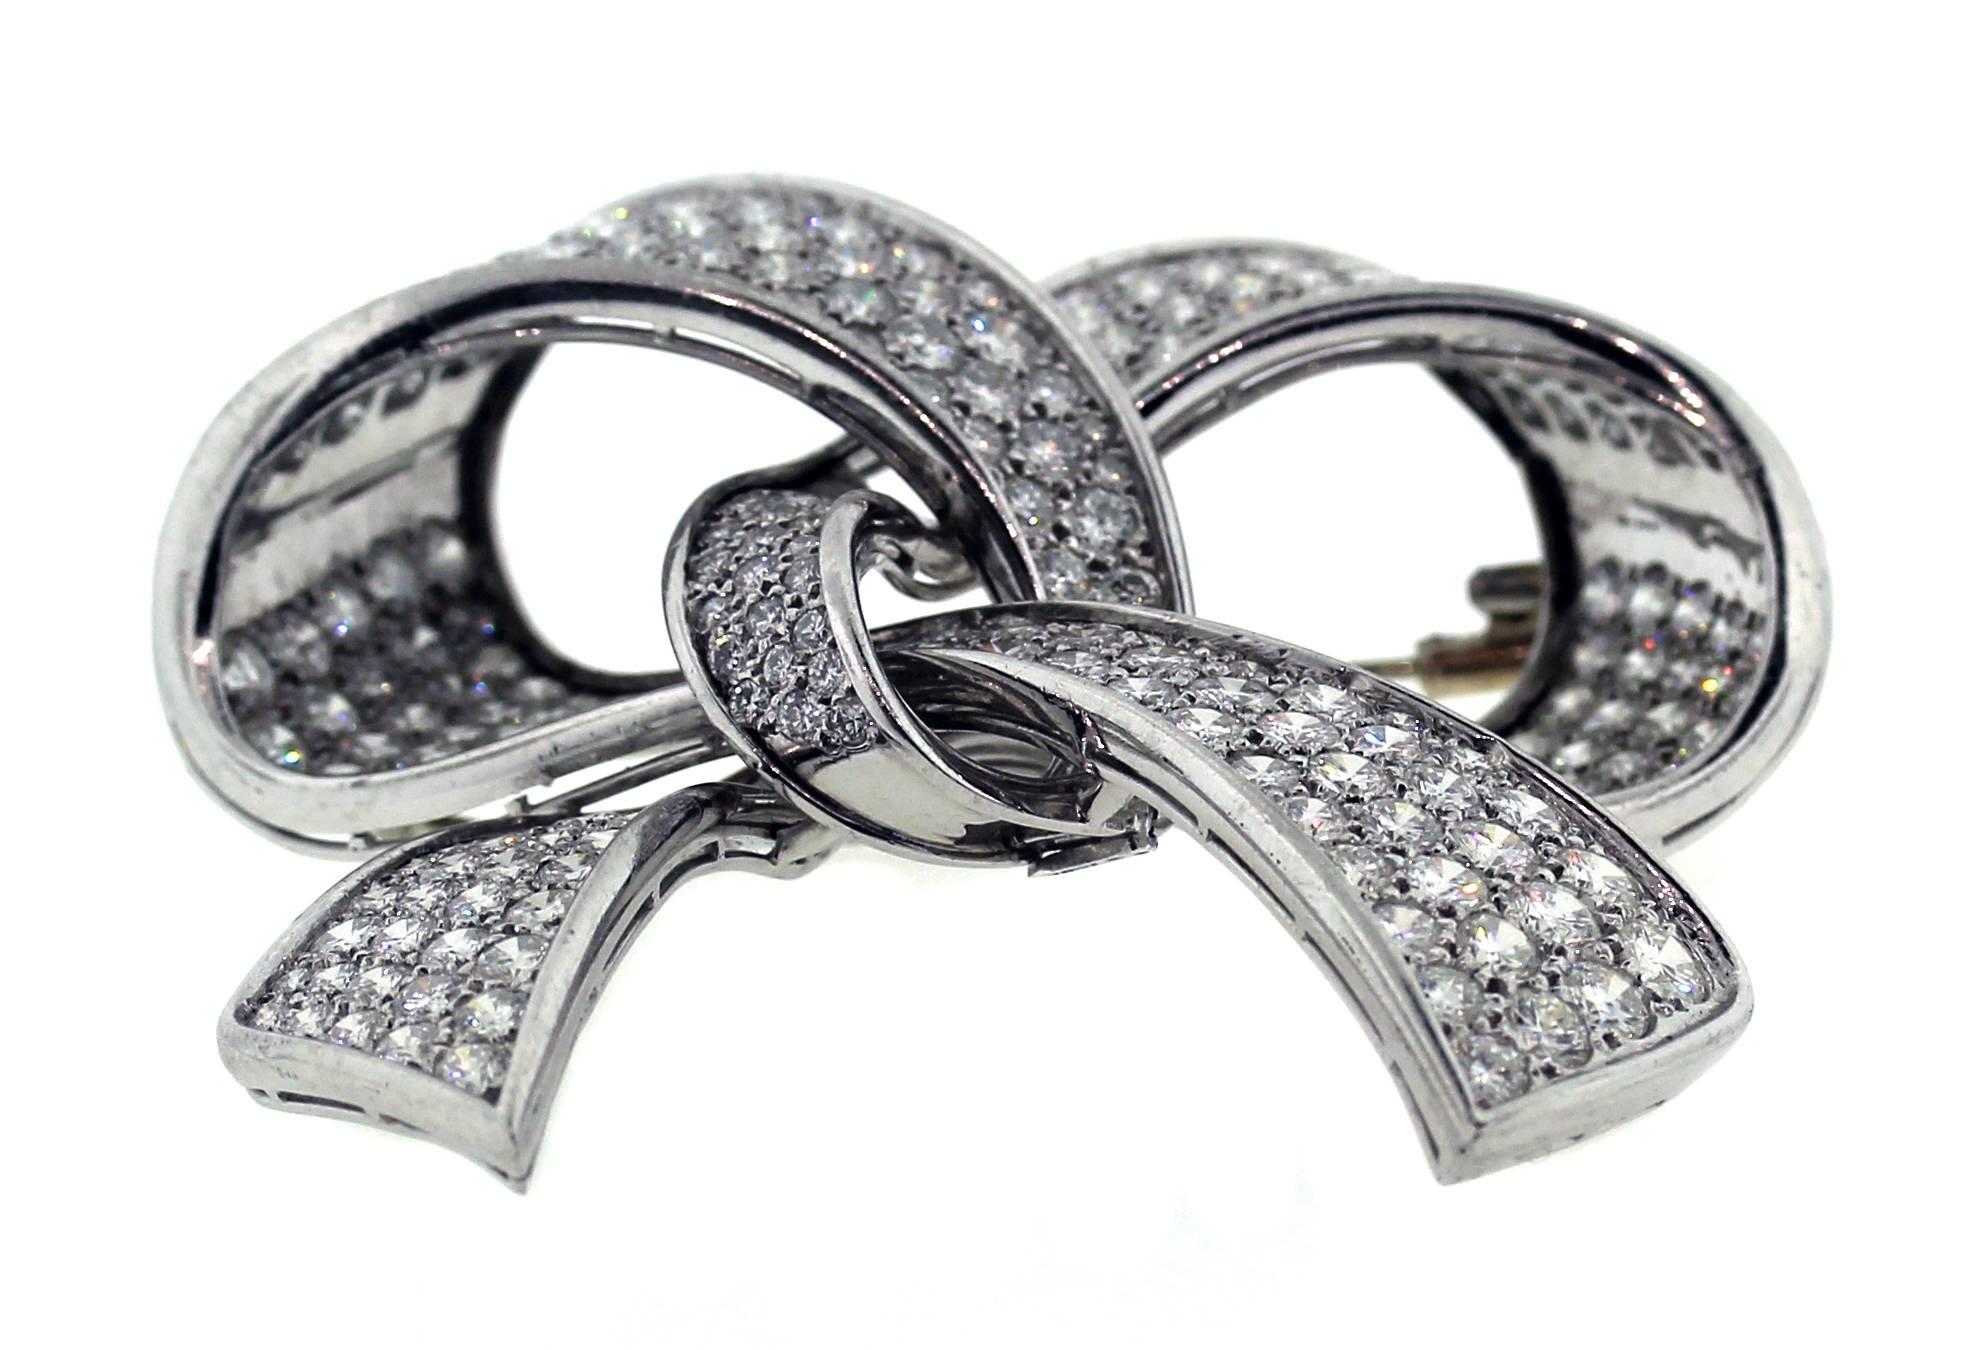 18K White Gold and Platinum Ladies Ribon Brooche Pin with Diamonds

Apprx. 25 carats of G Color, VS Clarity Diamonds cover this entire Ribbon Brooche Pin

Pin is 2.5 inches in length and 2.4 inches wide

Estate